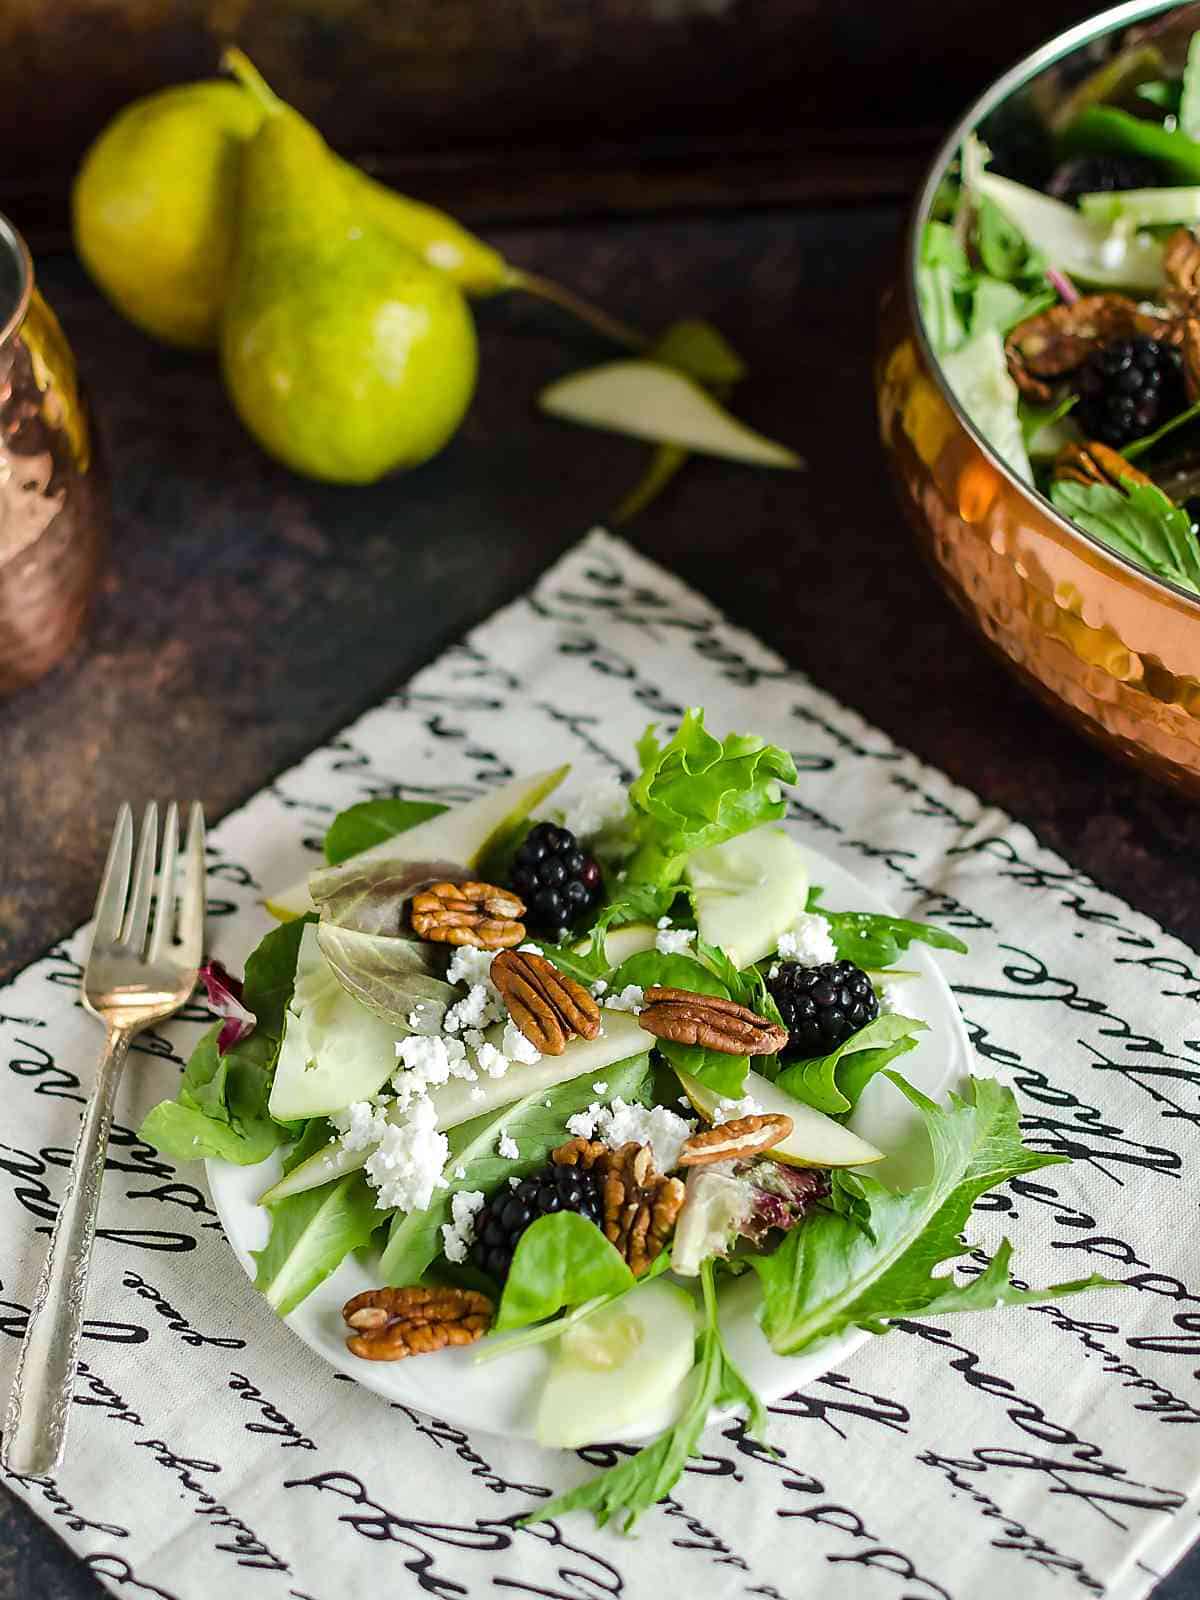 Mixed Greens Salad Recipe ~ a plate full of mixed green salad recipe that contains field greens, fresh pear slices, black berries, crumbled white cheese and pecan halves, bowl of salad in the background and 2 full pears